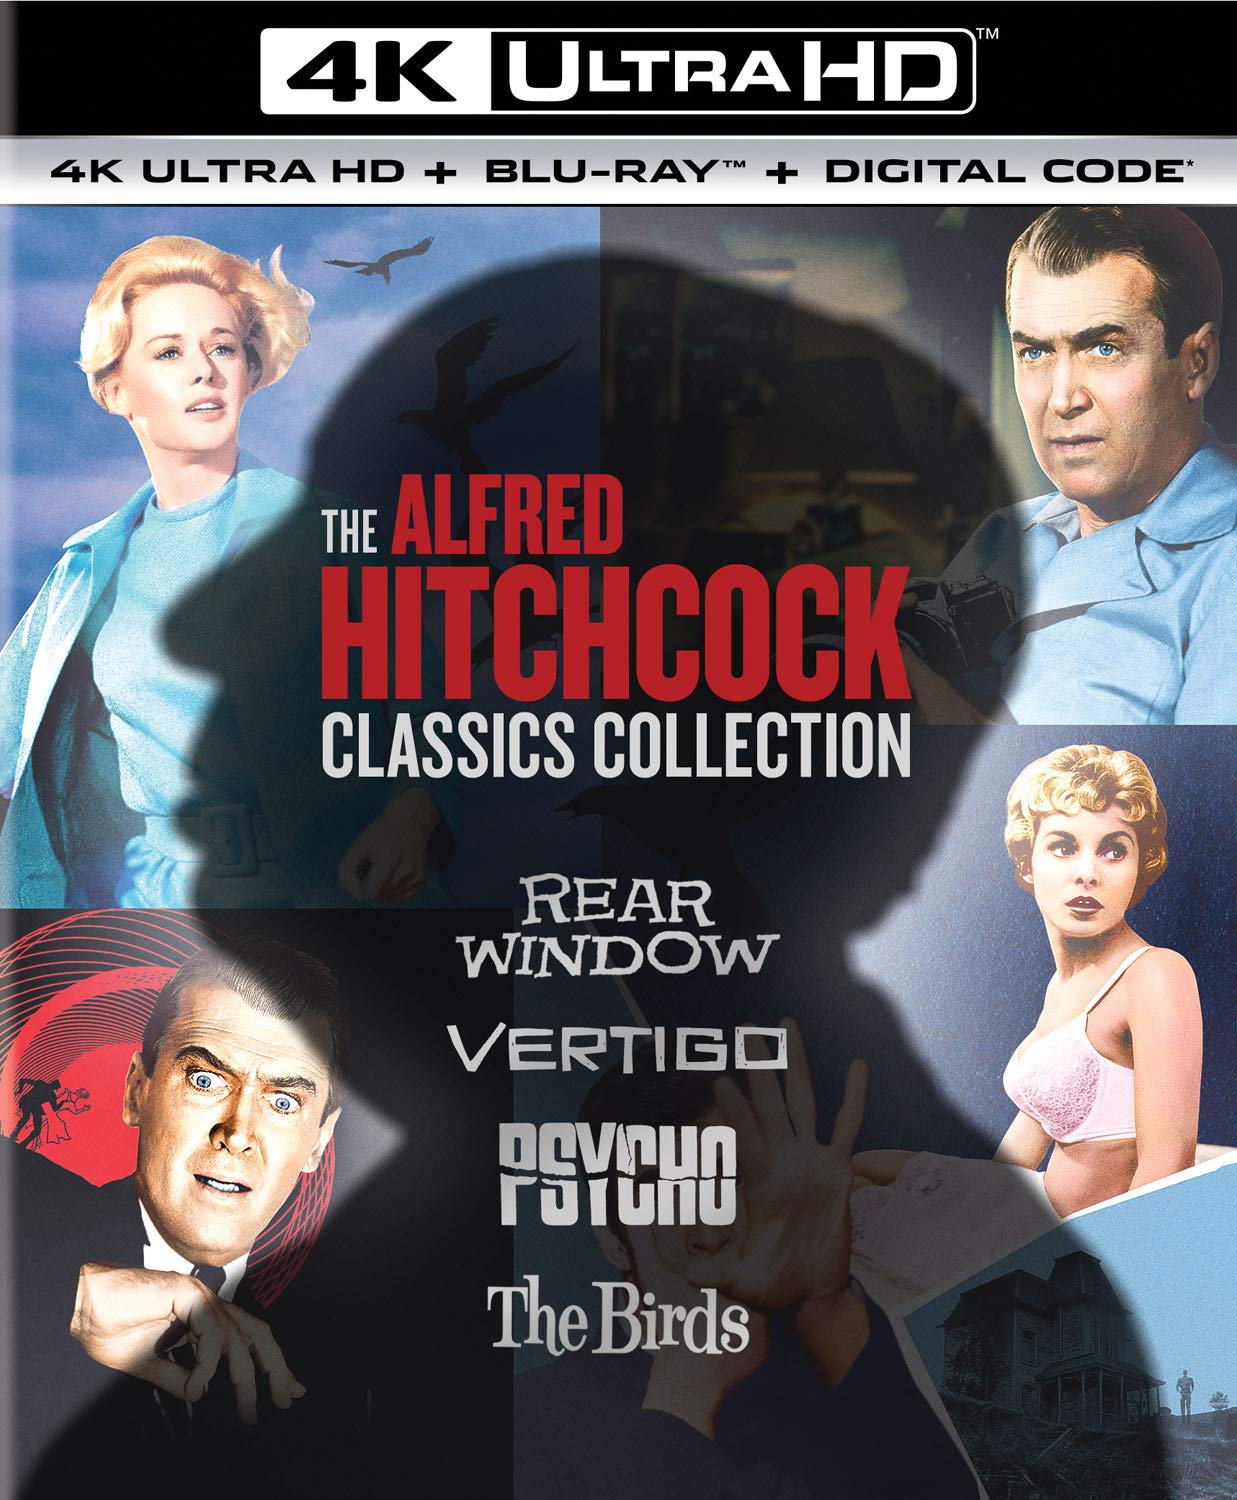 Film Intuition Review Database 4K UHD Blu-ray Review The Alfred Hitchcock Classics Collection picture image